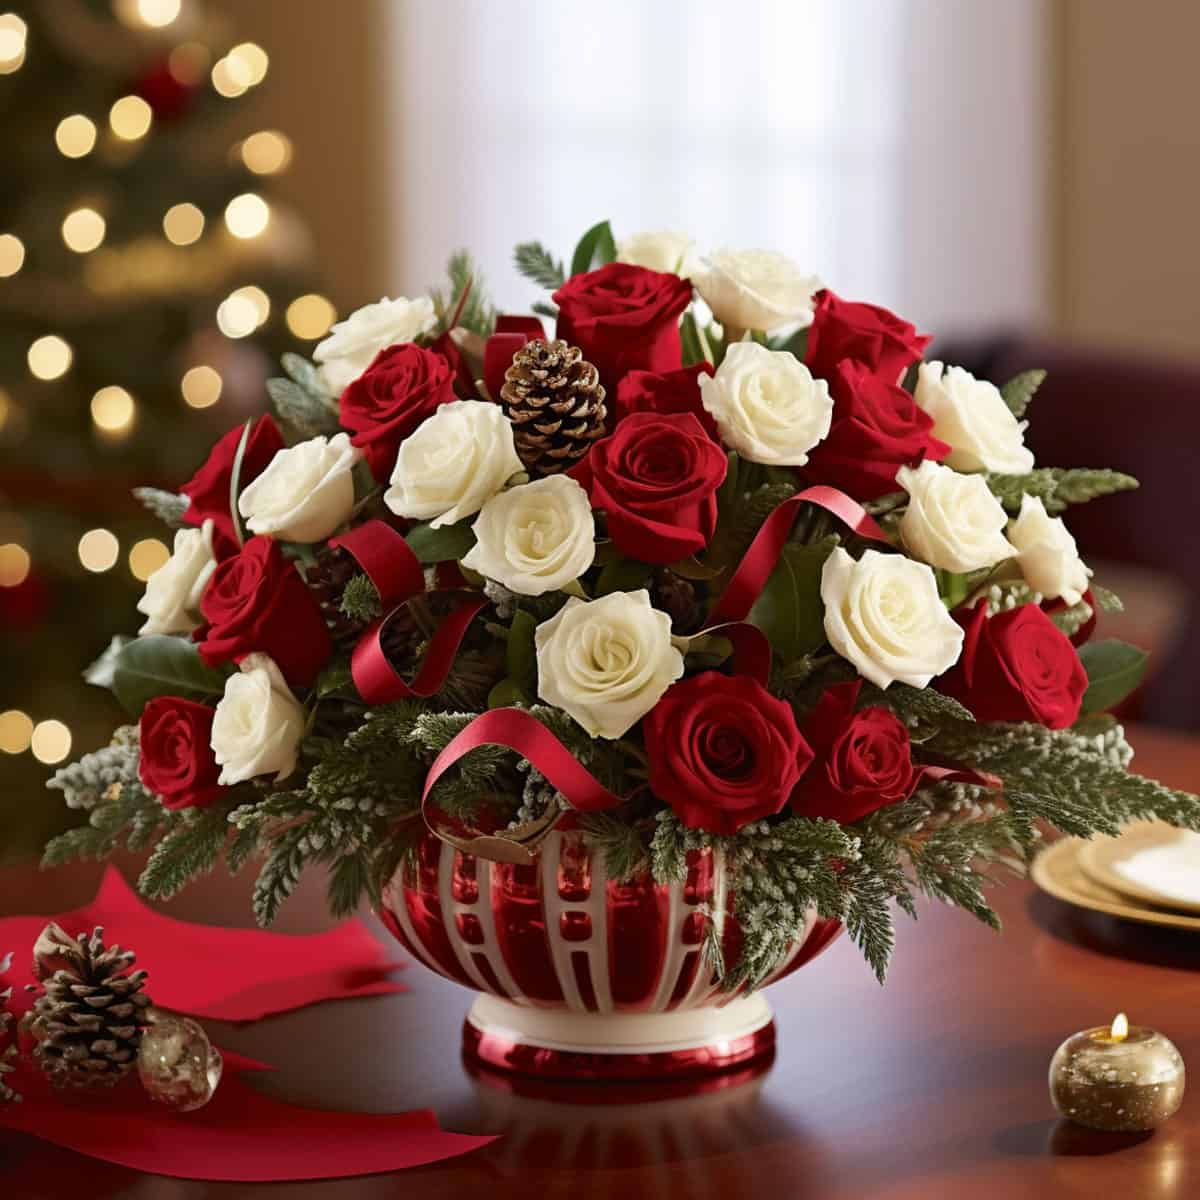 Victorian Christmas with a classic flower arrangement that will become the centerpiece of your holiday decor. Select luxurious red and white roses, symbols of yuletide joy and Victorian grace